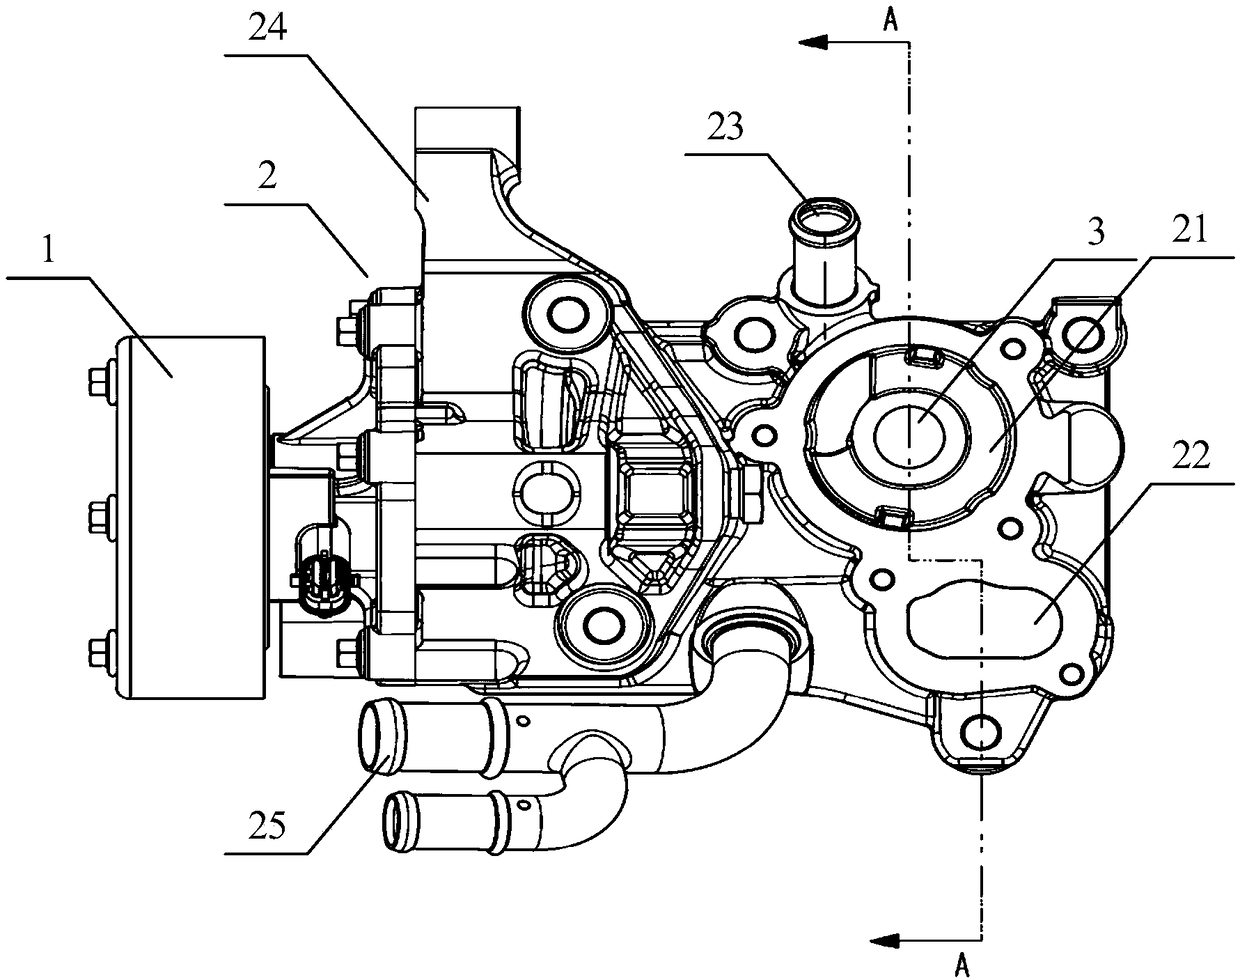 Water pump assembly, cooling system, engine and automobile